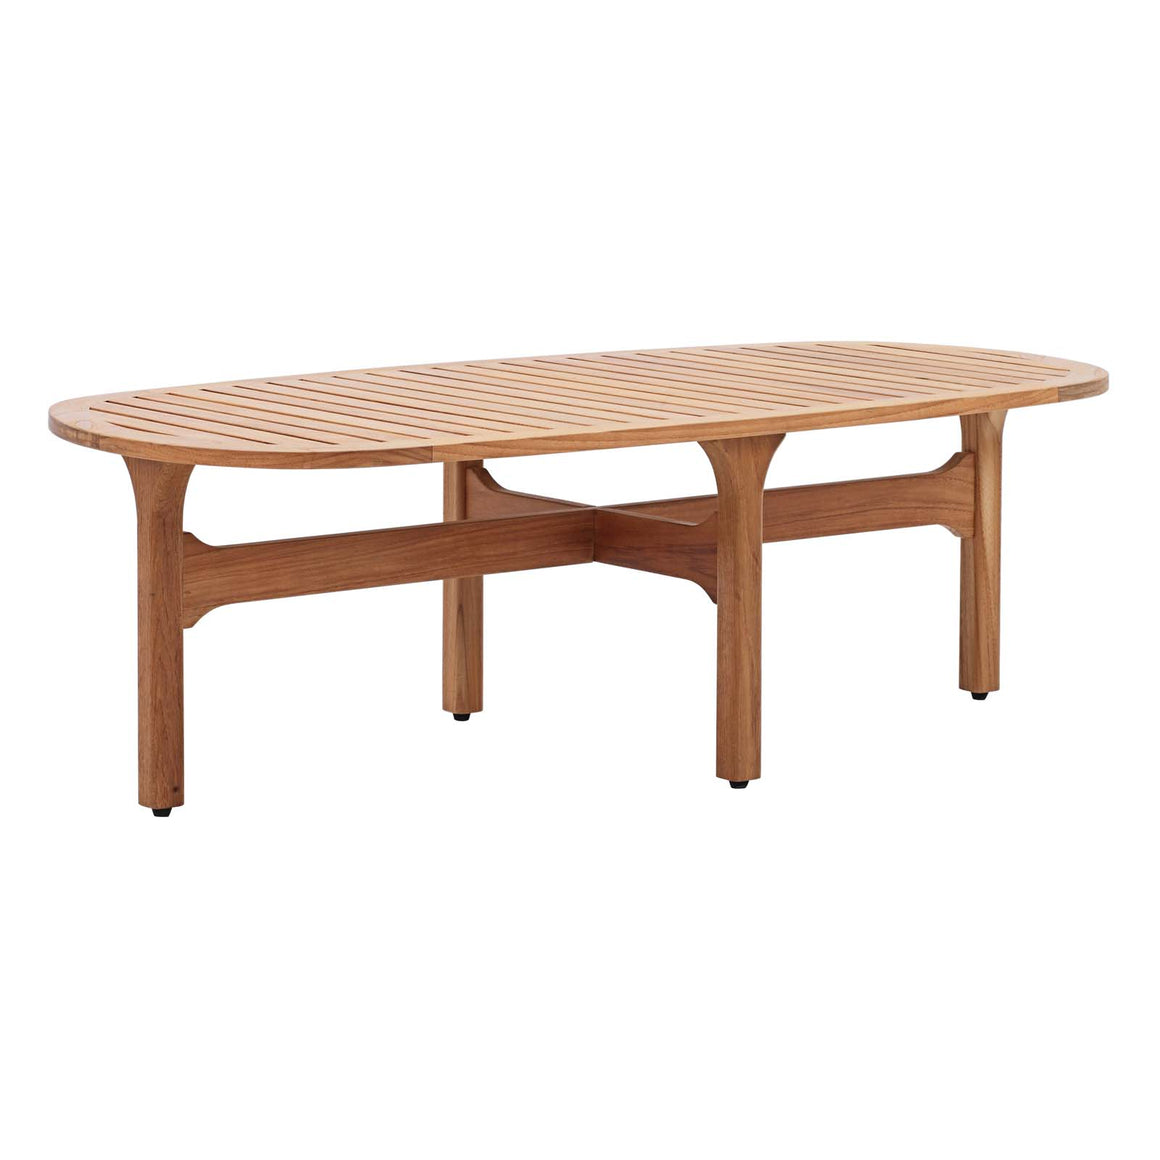 Saratoga Outdoor Patio Premium Grade A Teak Wood Oval Coffee Table In Natural